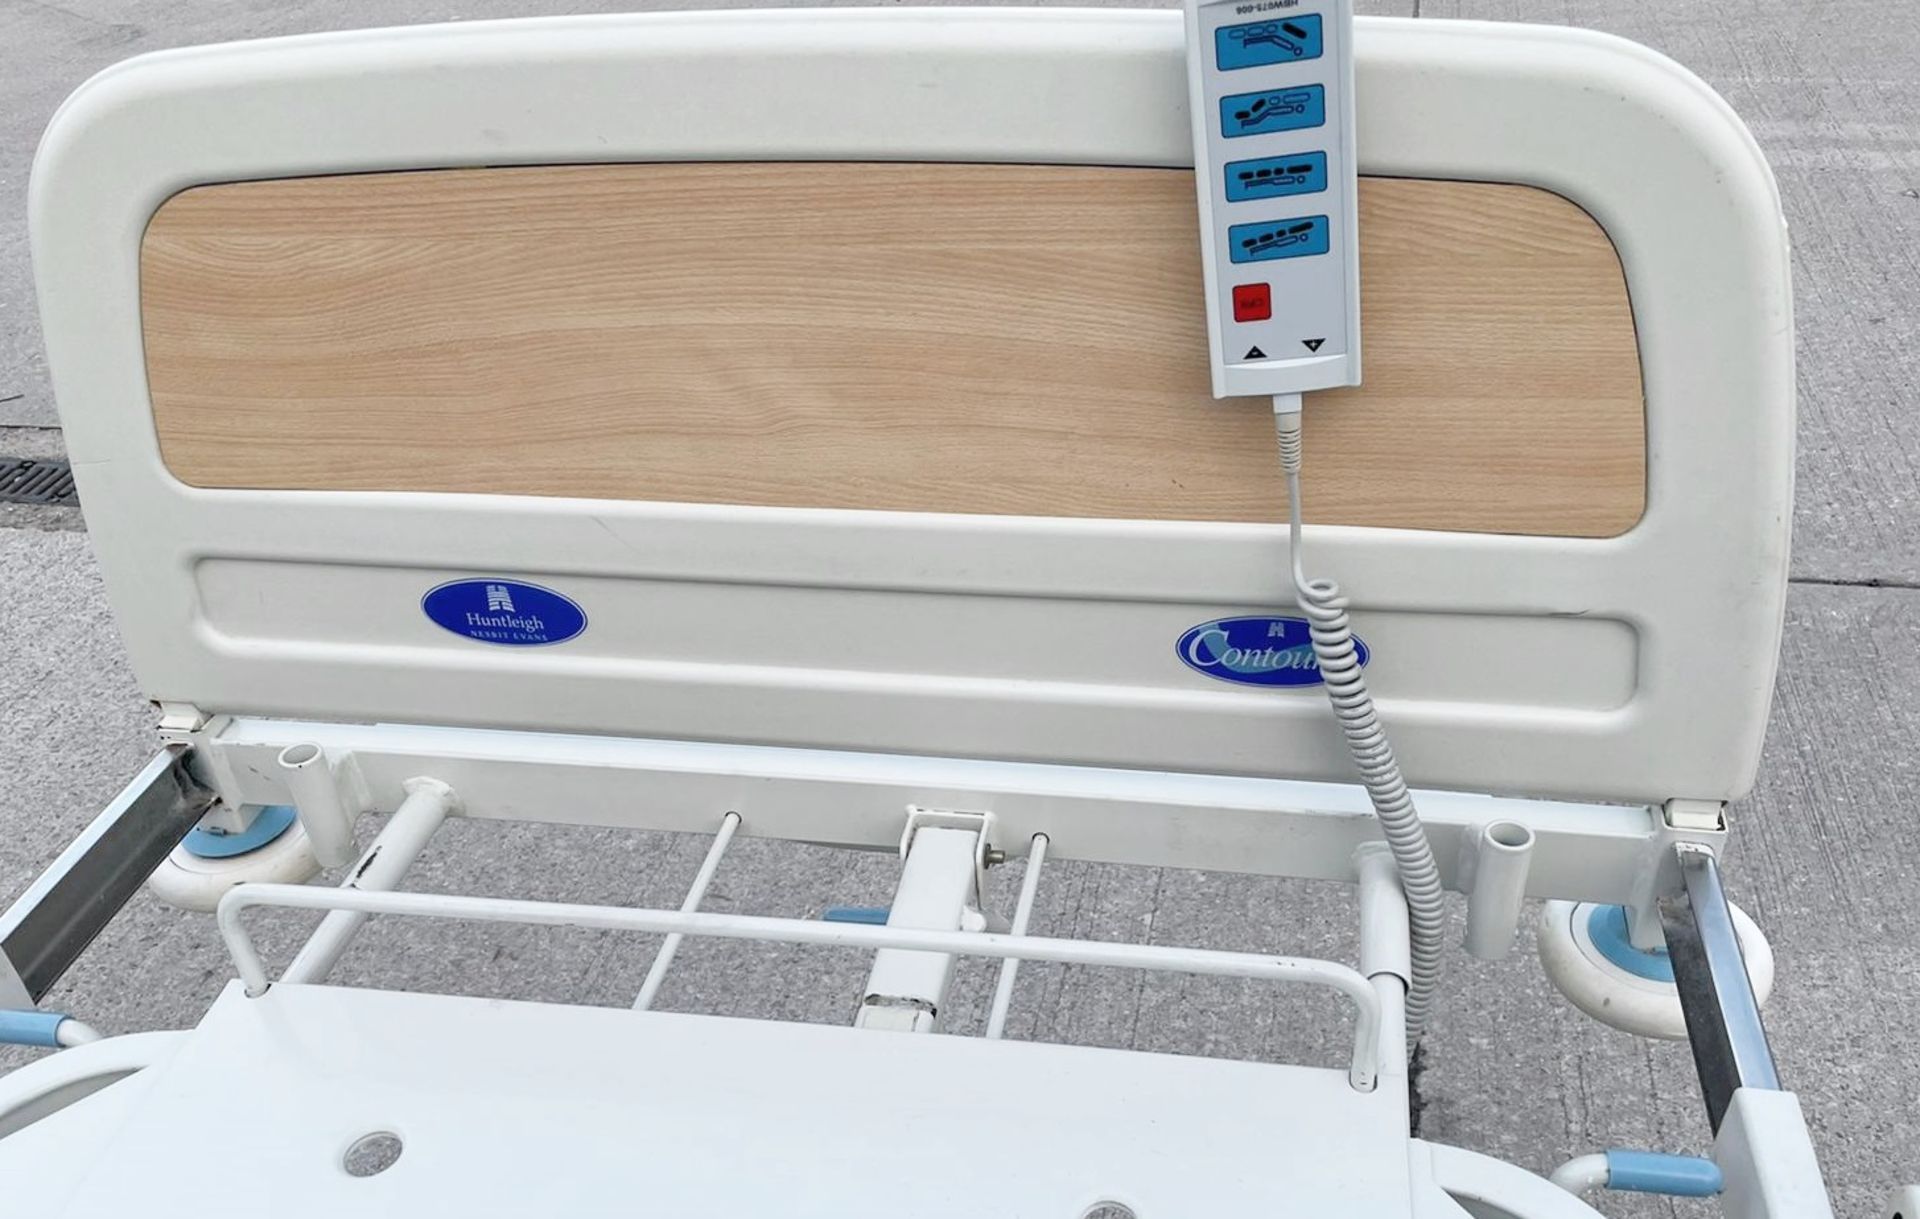 1 x Huntleigh CONTOURA Electric Hospital Bed - Features Rise/Fall 3-Way Profiling, Side Rails, - Image 13 of 16